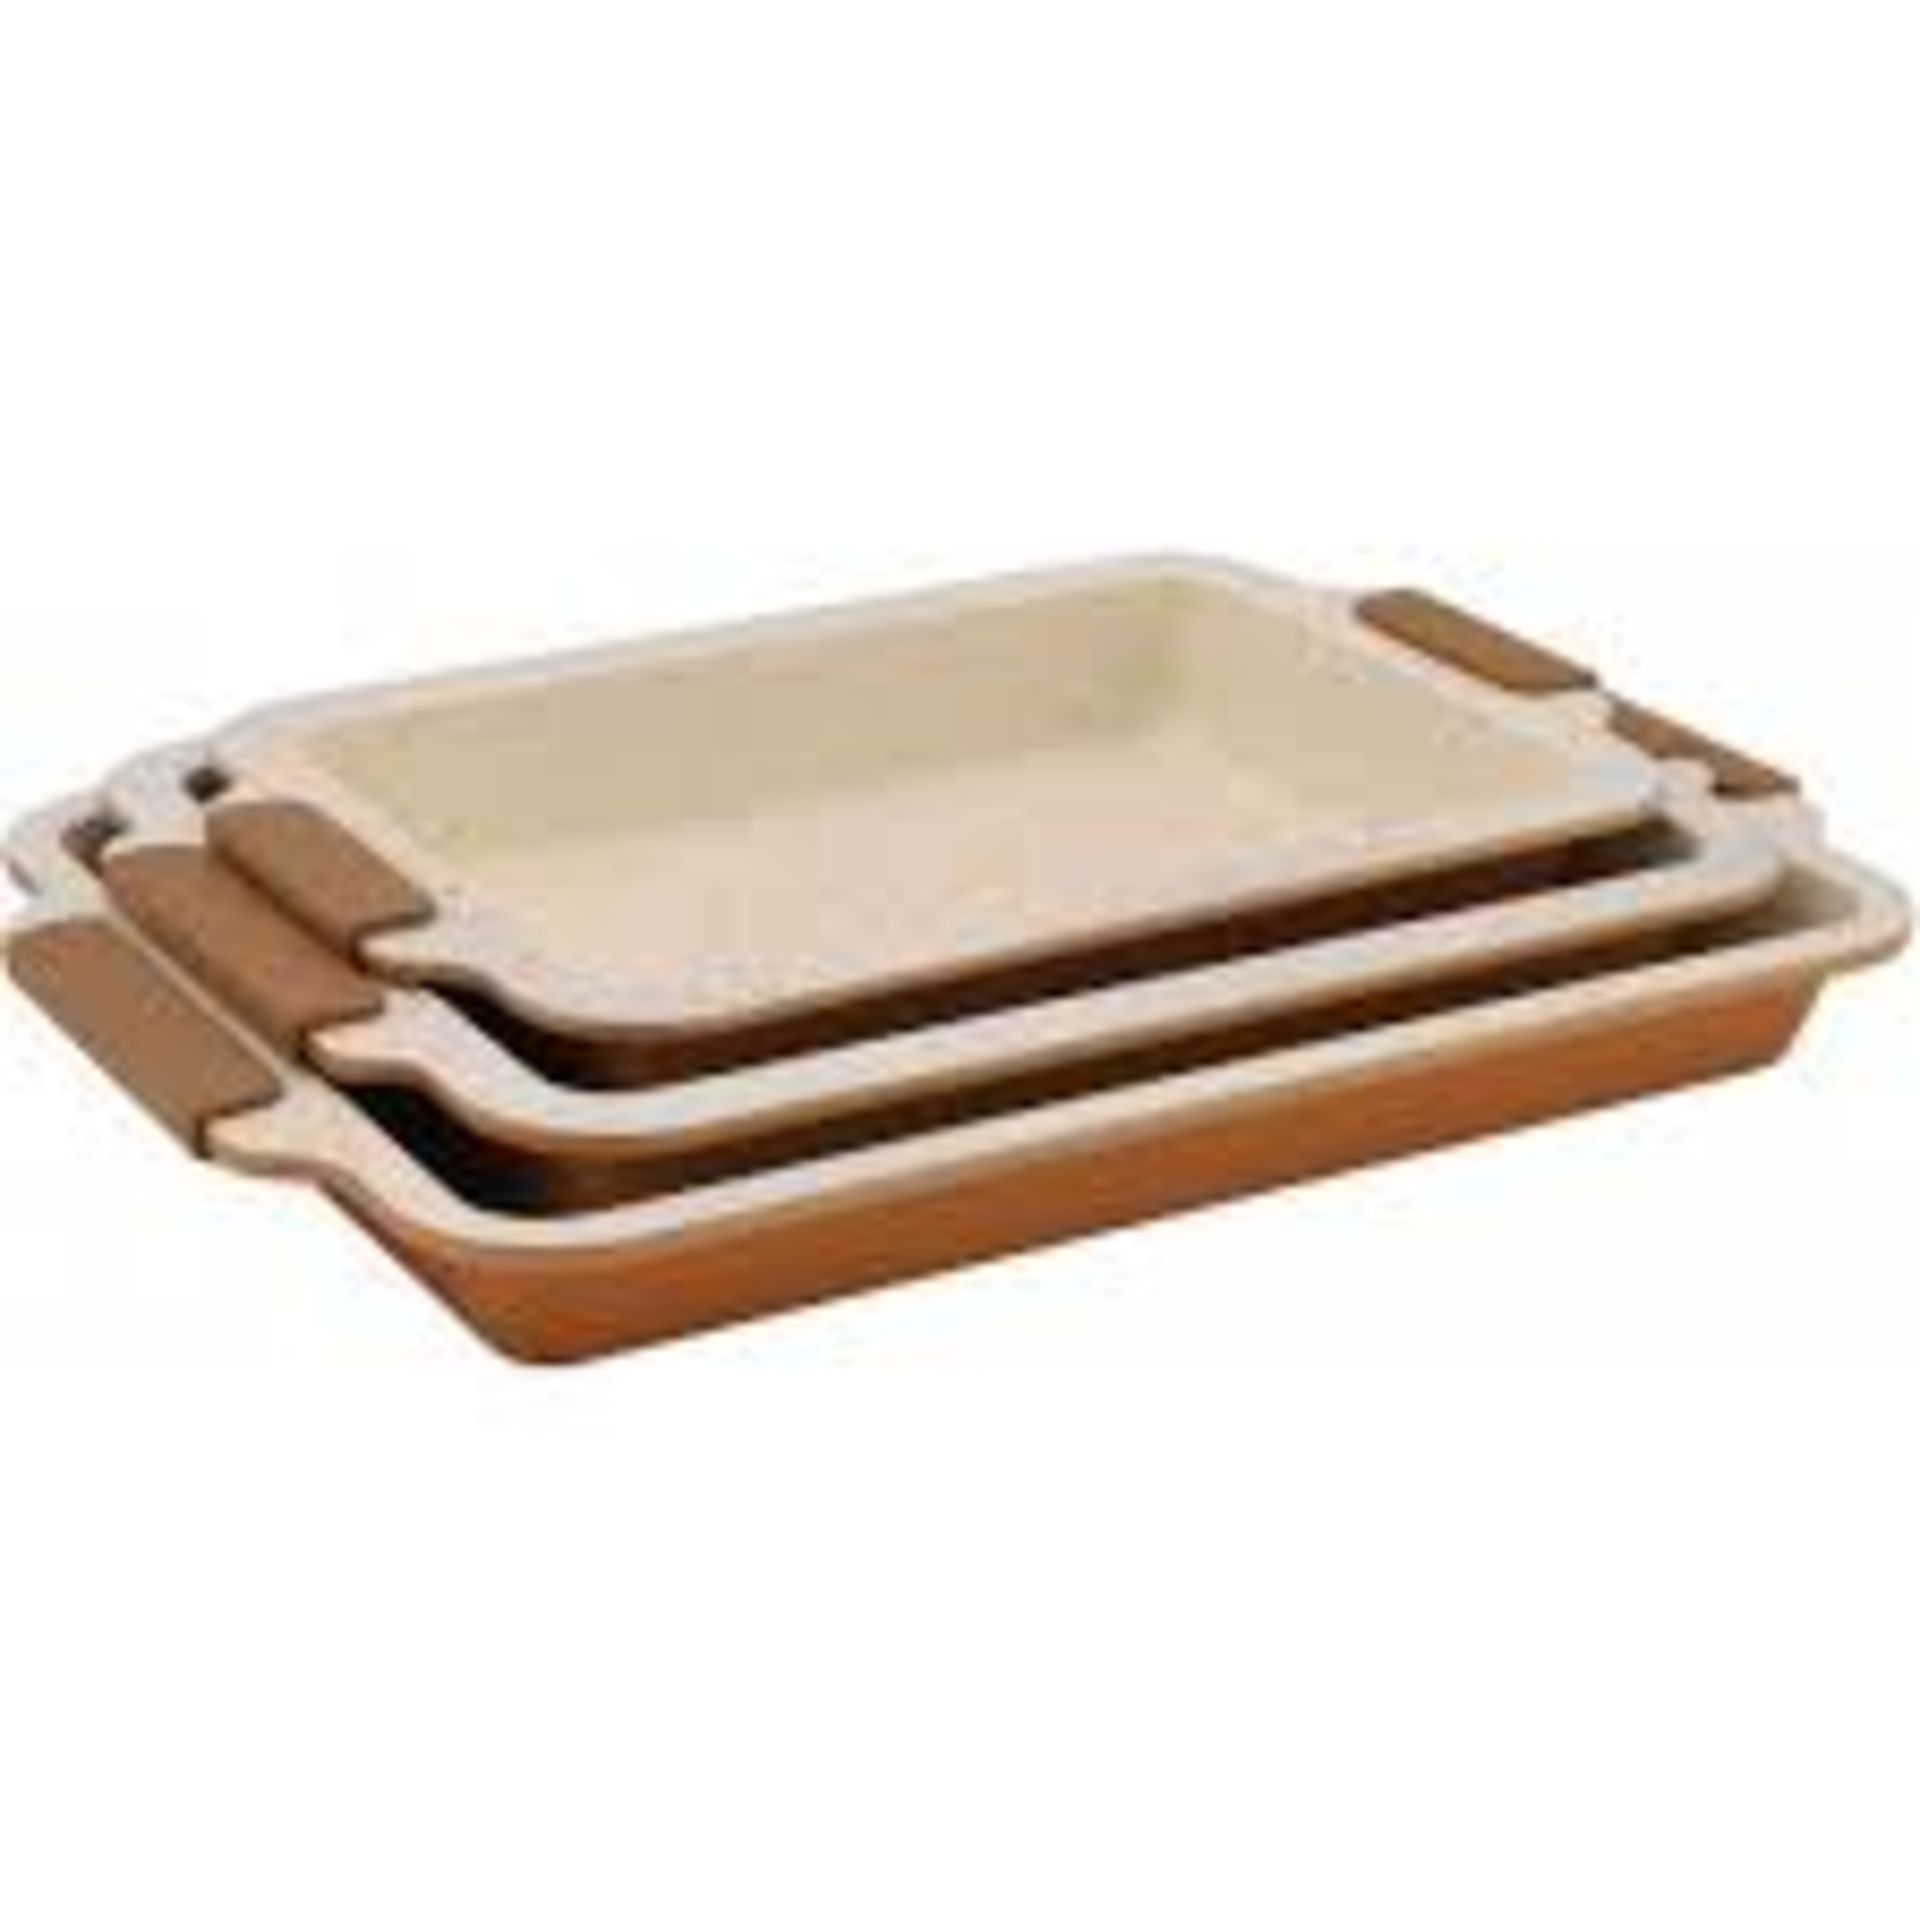 V Brand New Marble Ceramic Coated Roasting Pan Set - Silicone Grip Handles